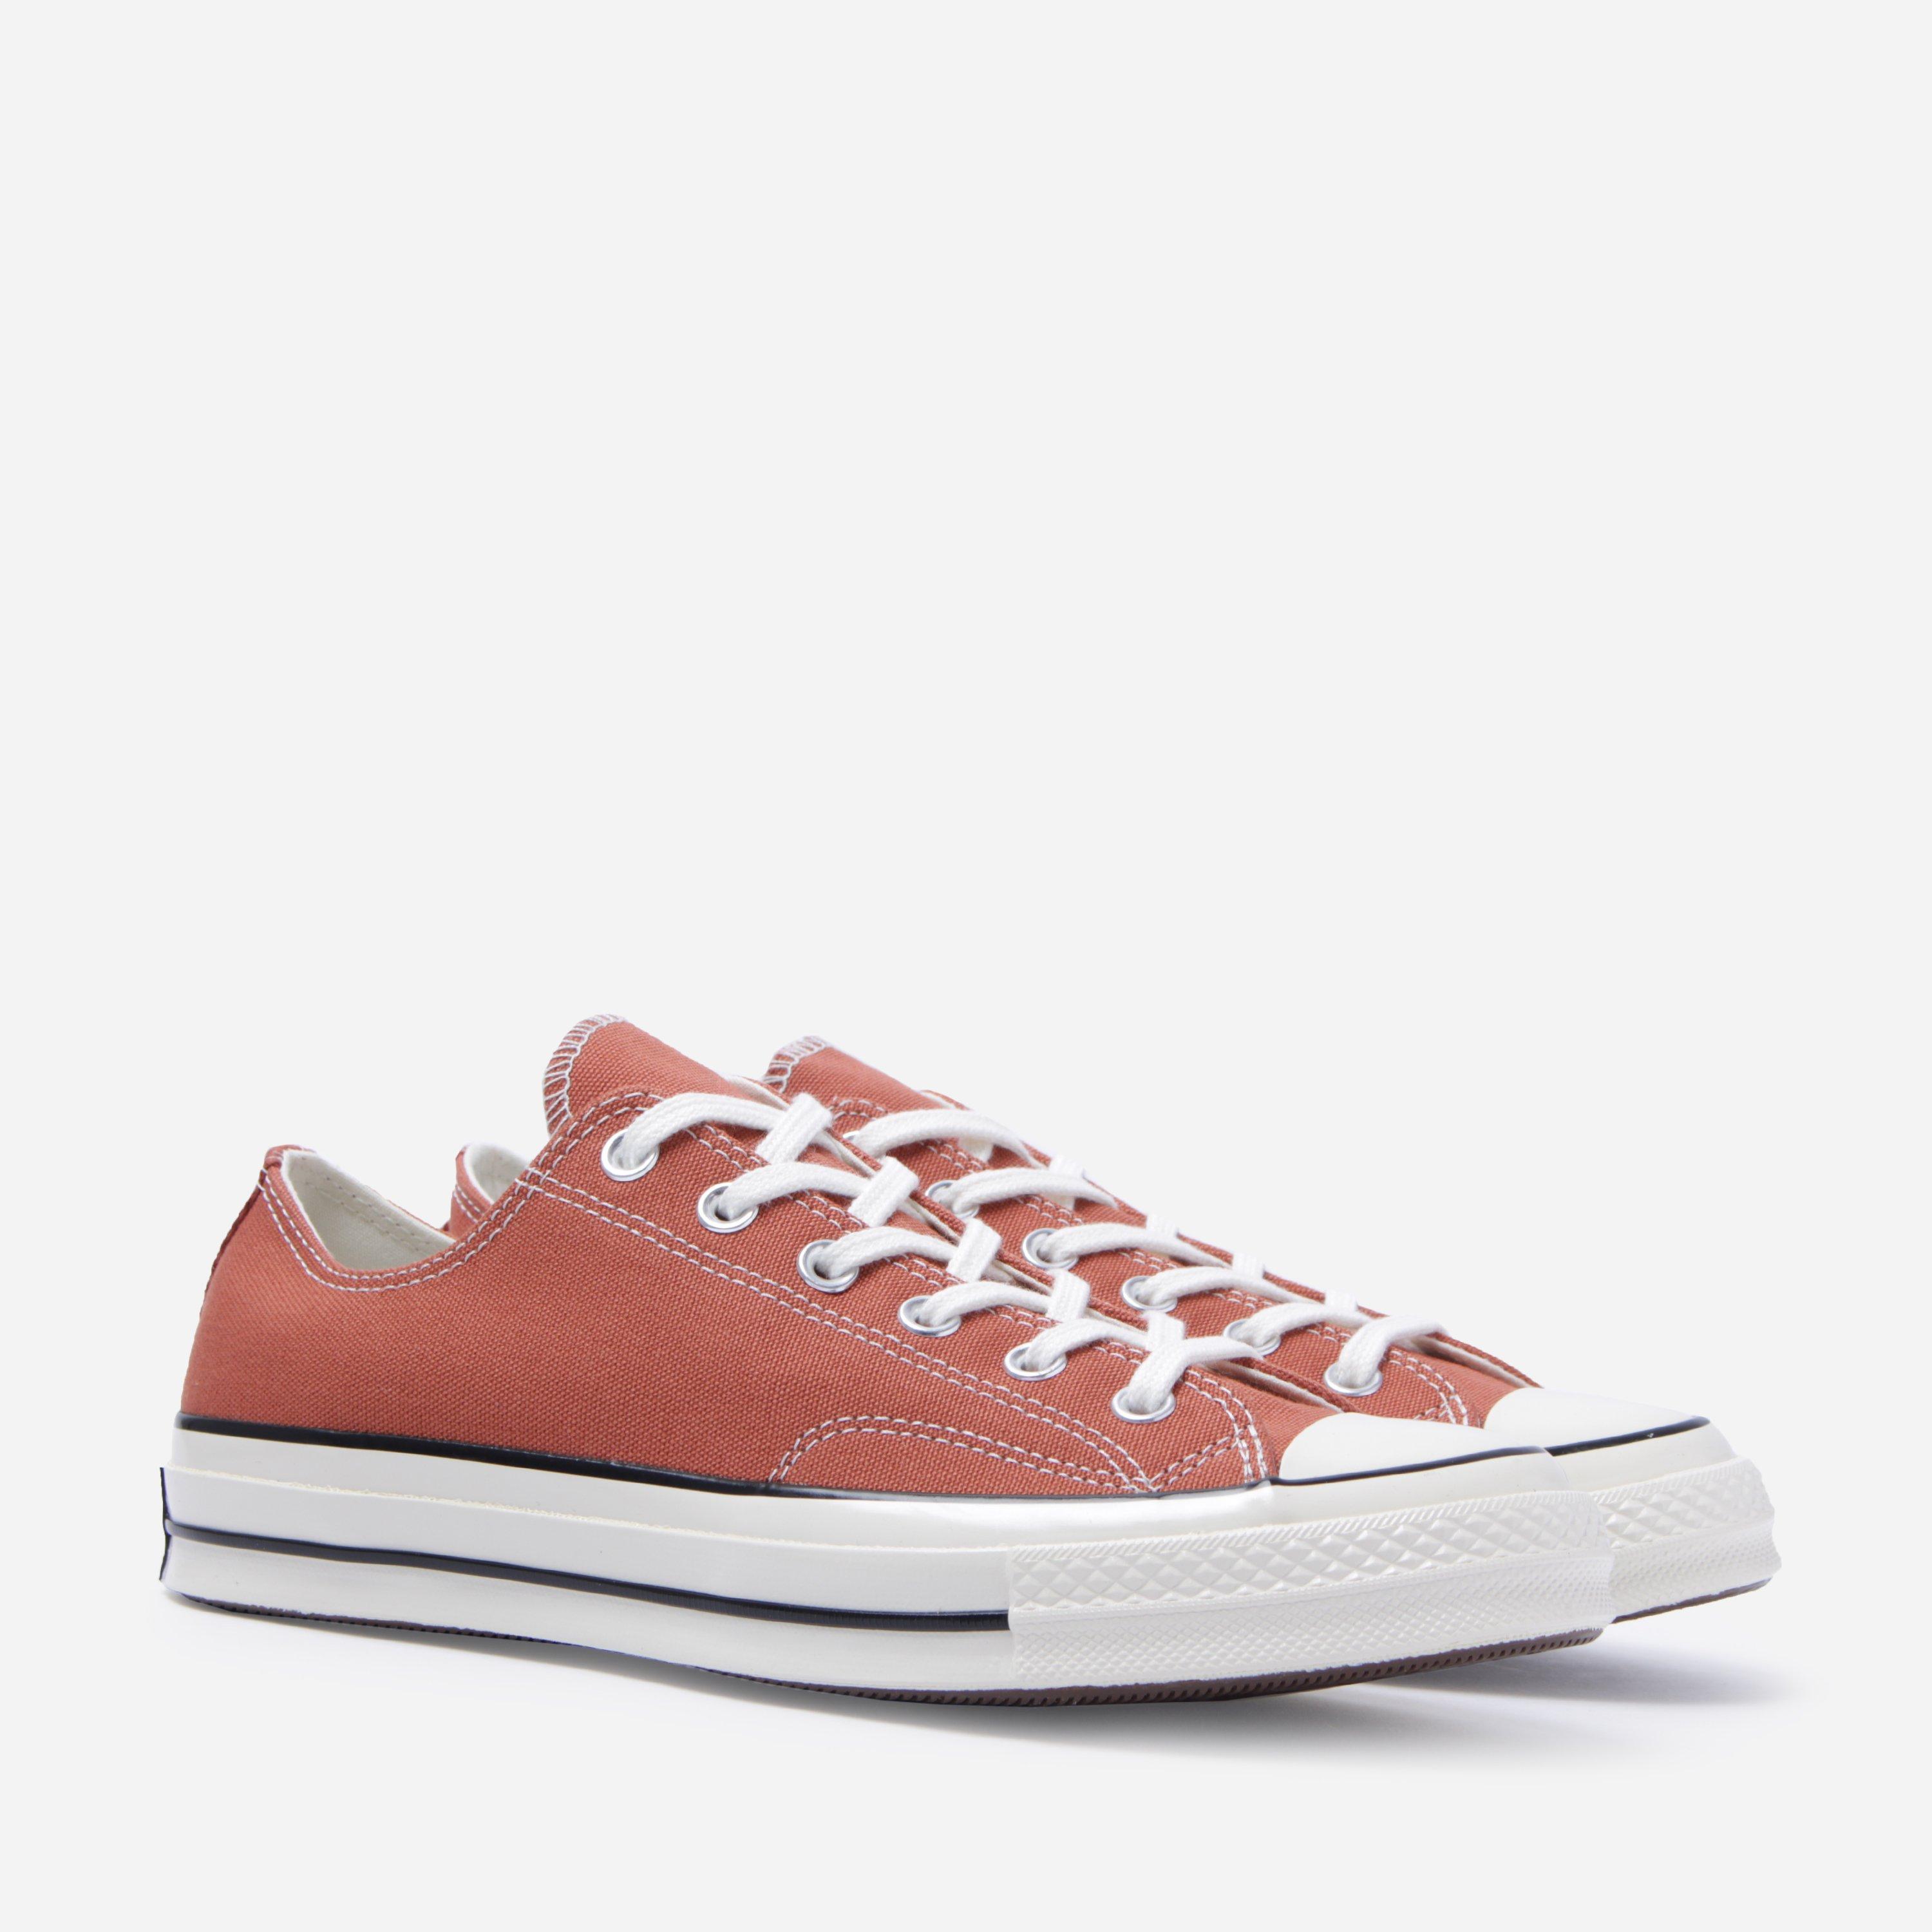 Converse Chuck 70 Ox in Red for Men - Lyst